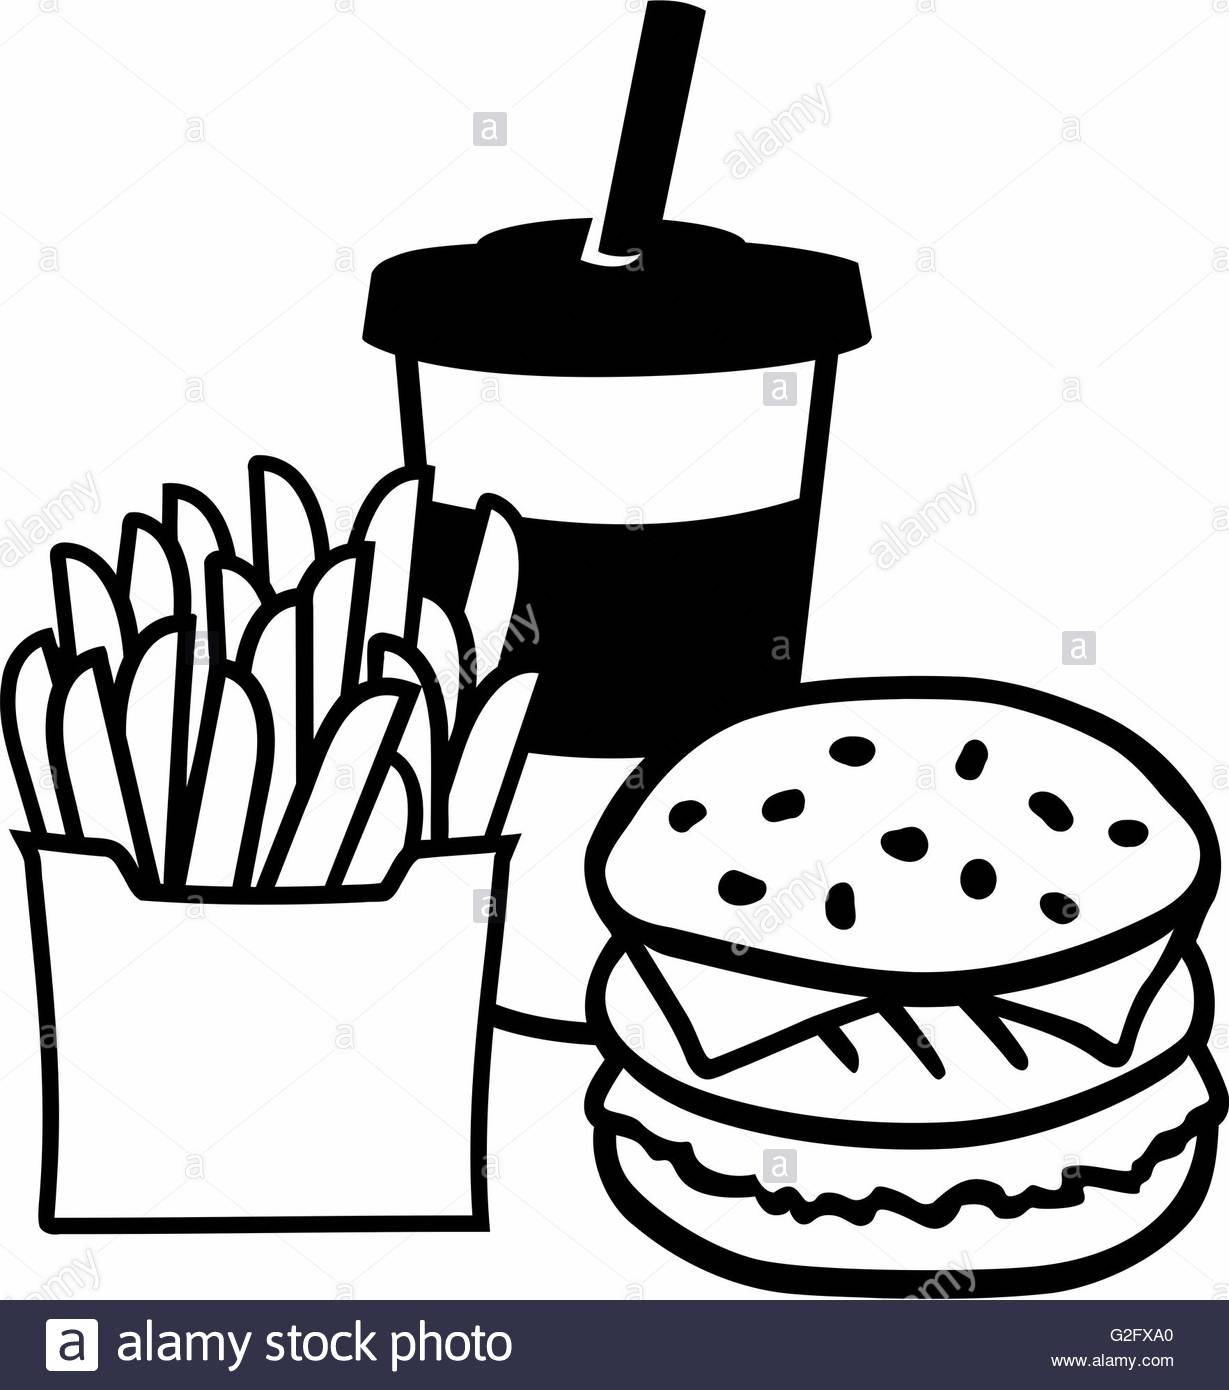 Burger And Fries Black and White Stock Photos & Images.